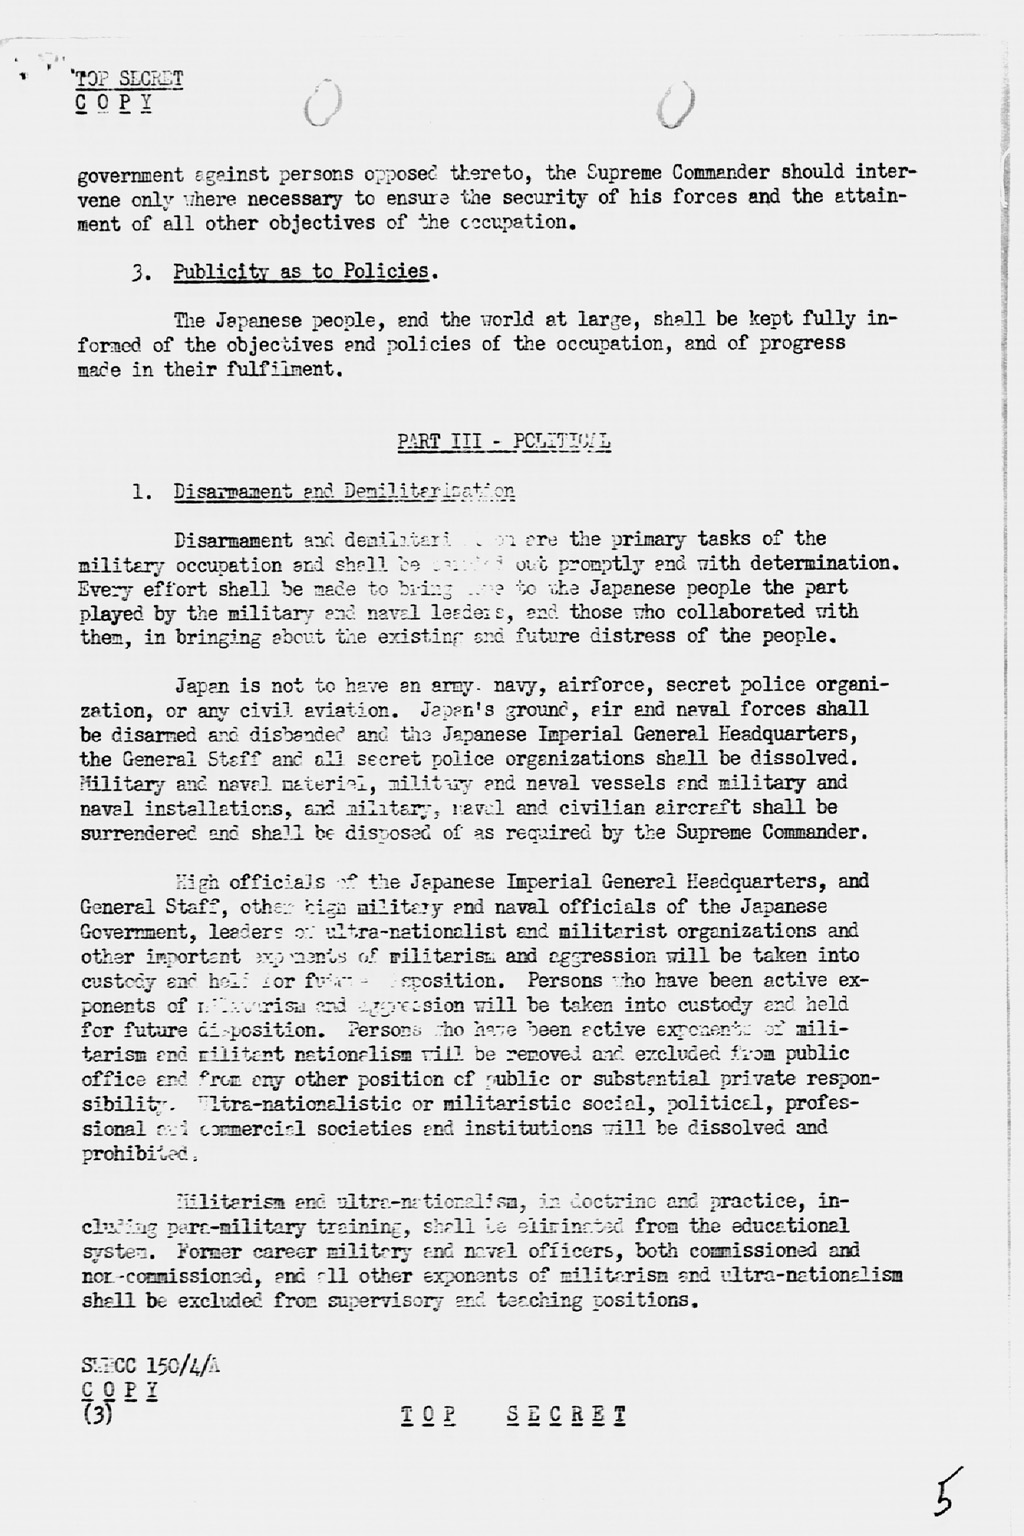 U.S. Initial Post-Surrender Policy for Japan (SWNCC150/4/A)(larger)